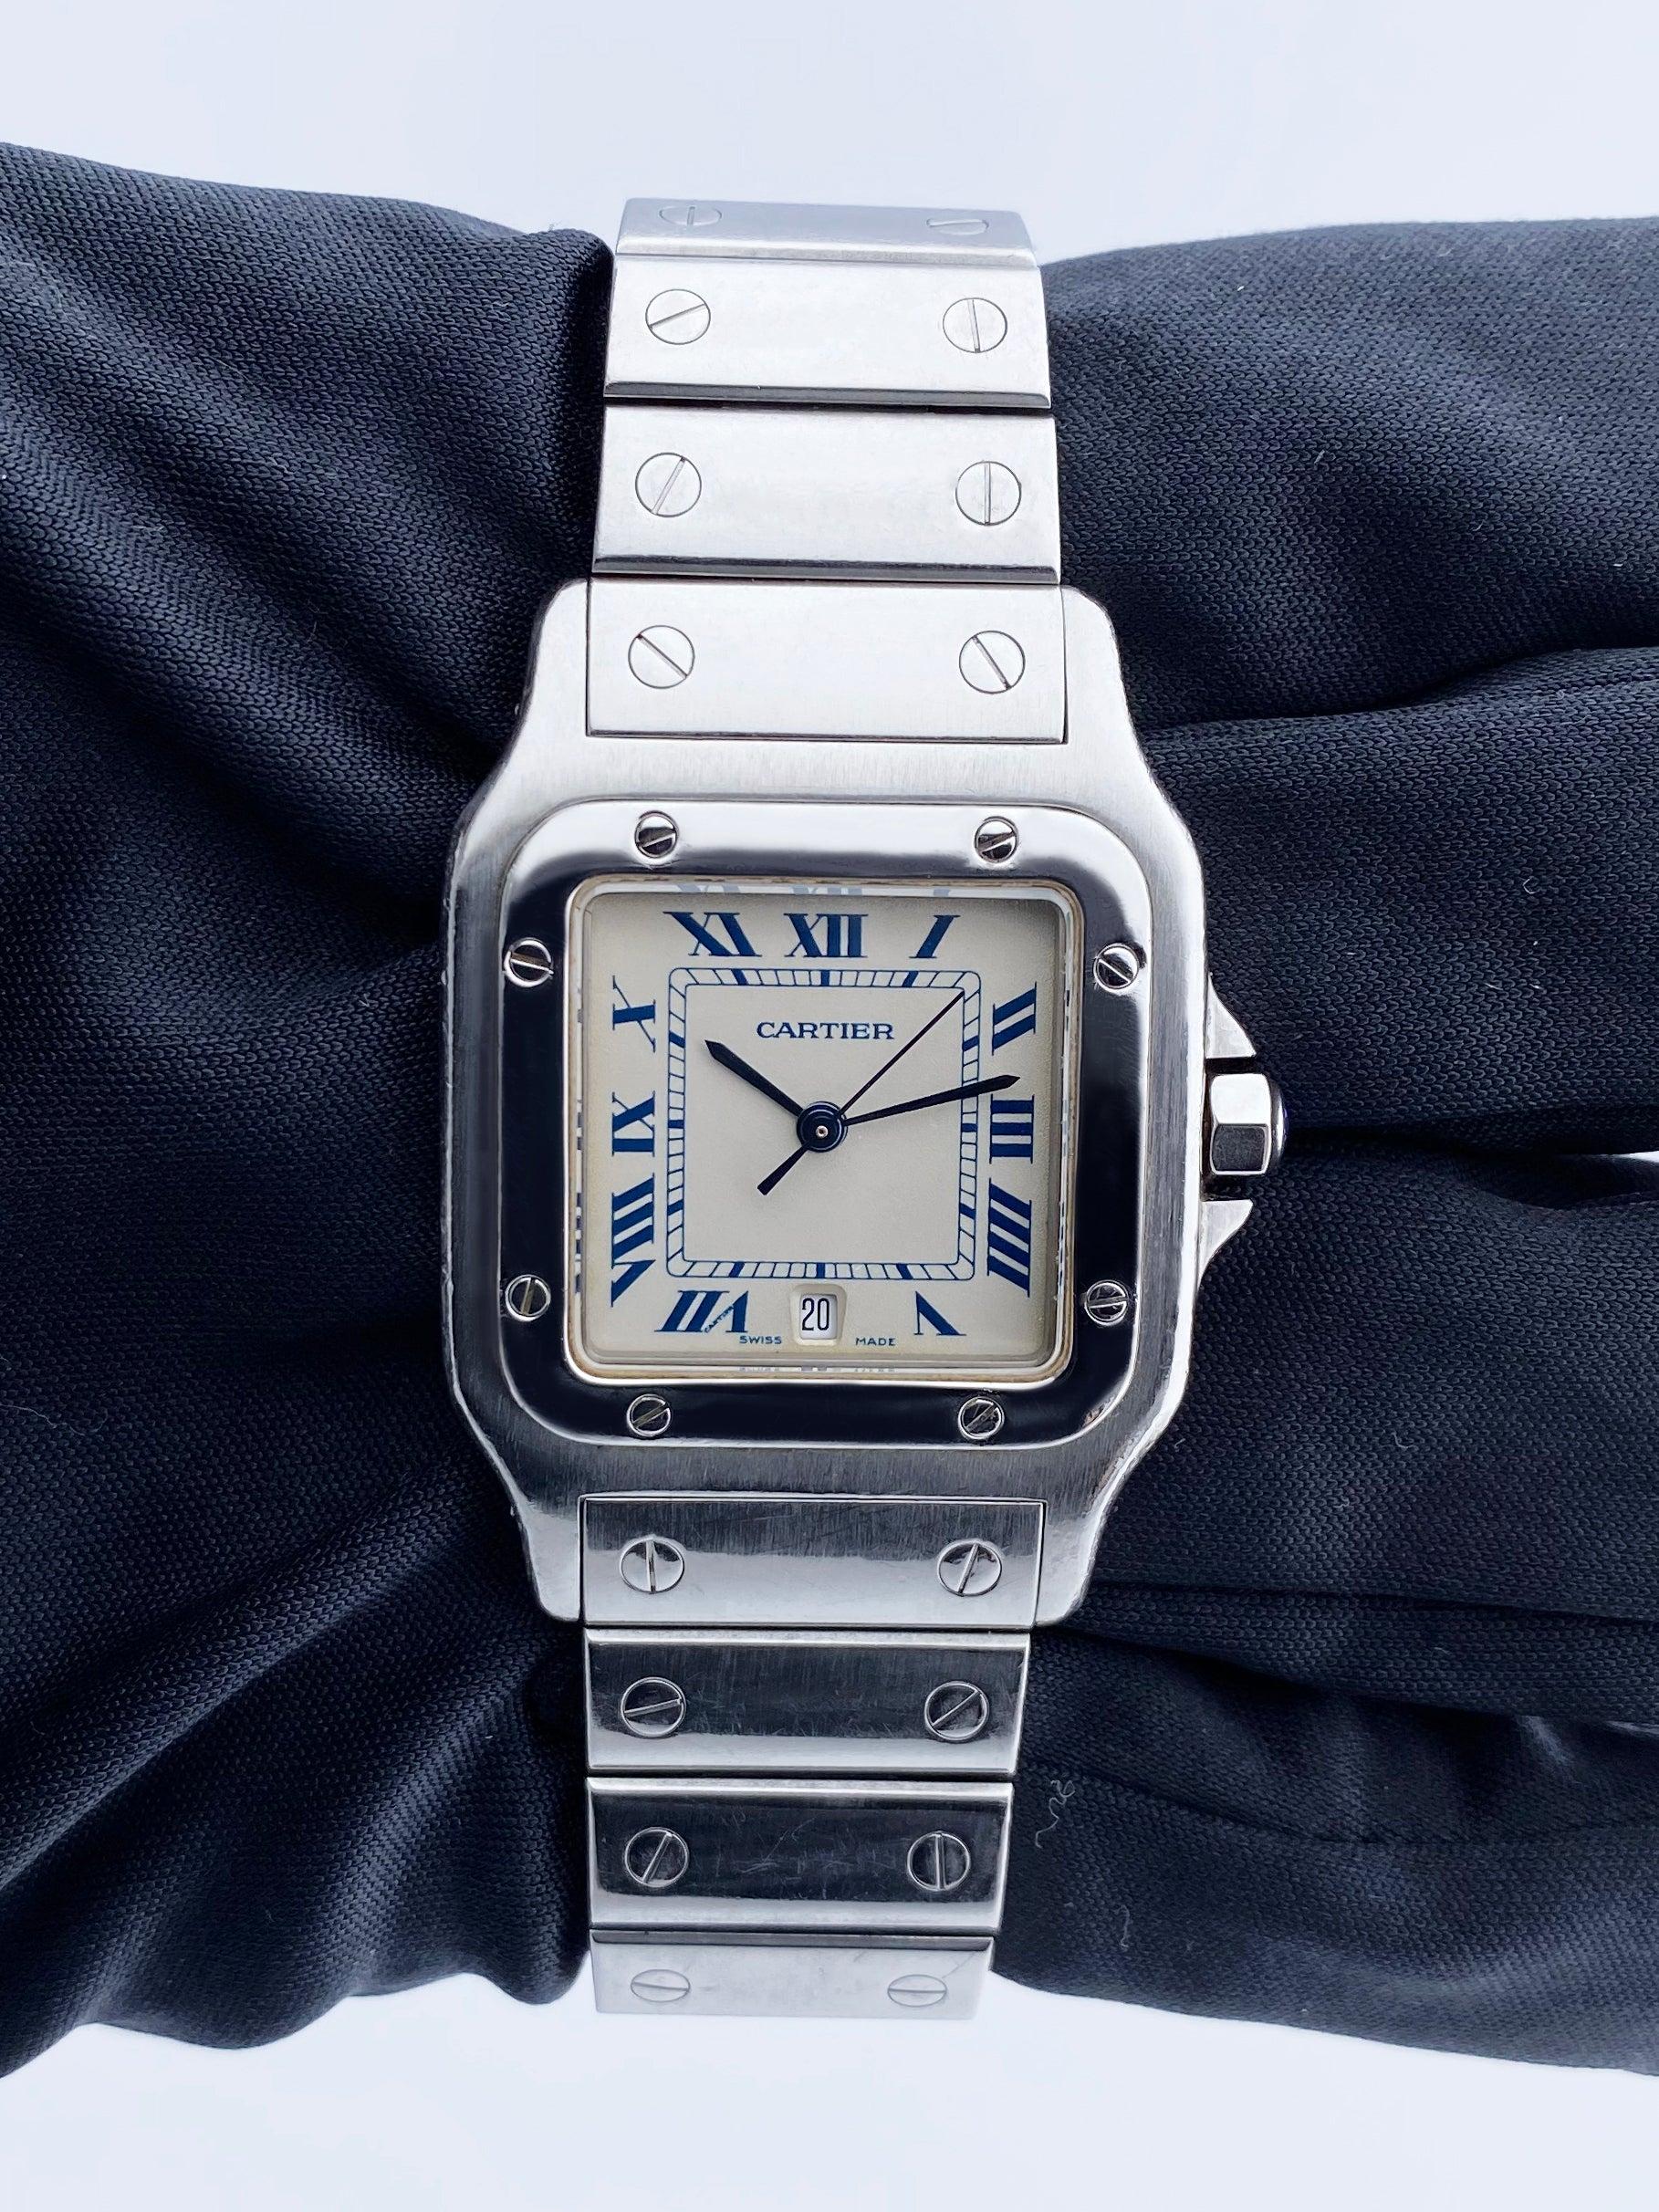 Cartier Santos Galbee 987901 Mens Watch. 29mm stainless steel case with fixed bezel. Off-white dial with blue hands and black Roman numeral hour marker. Date display at the 6 o'clock position. Minute makers on the inner dial. Stainless steel